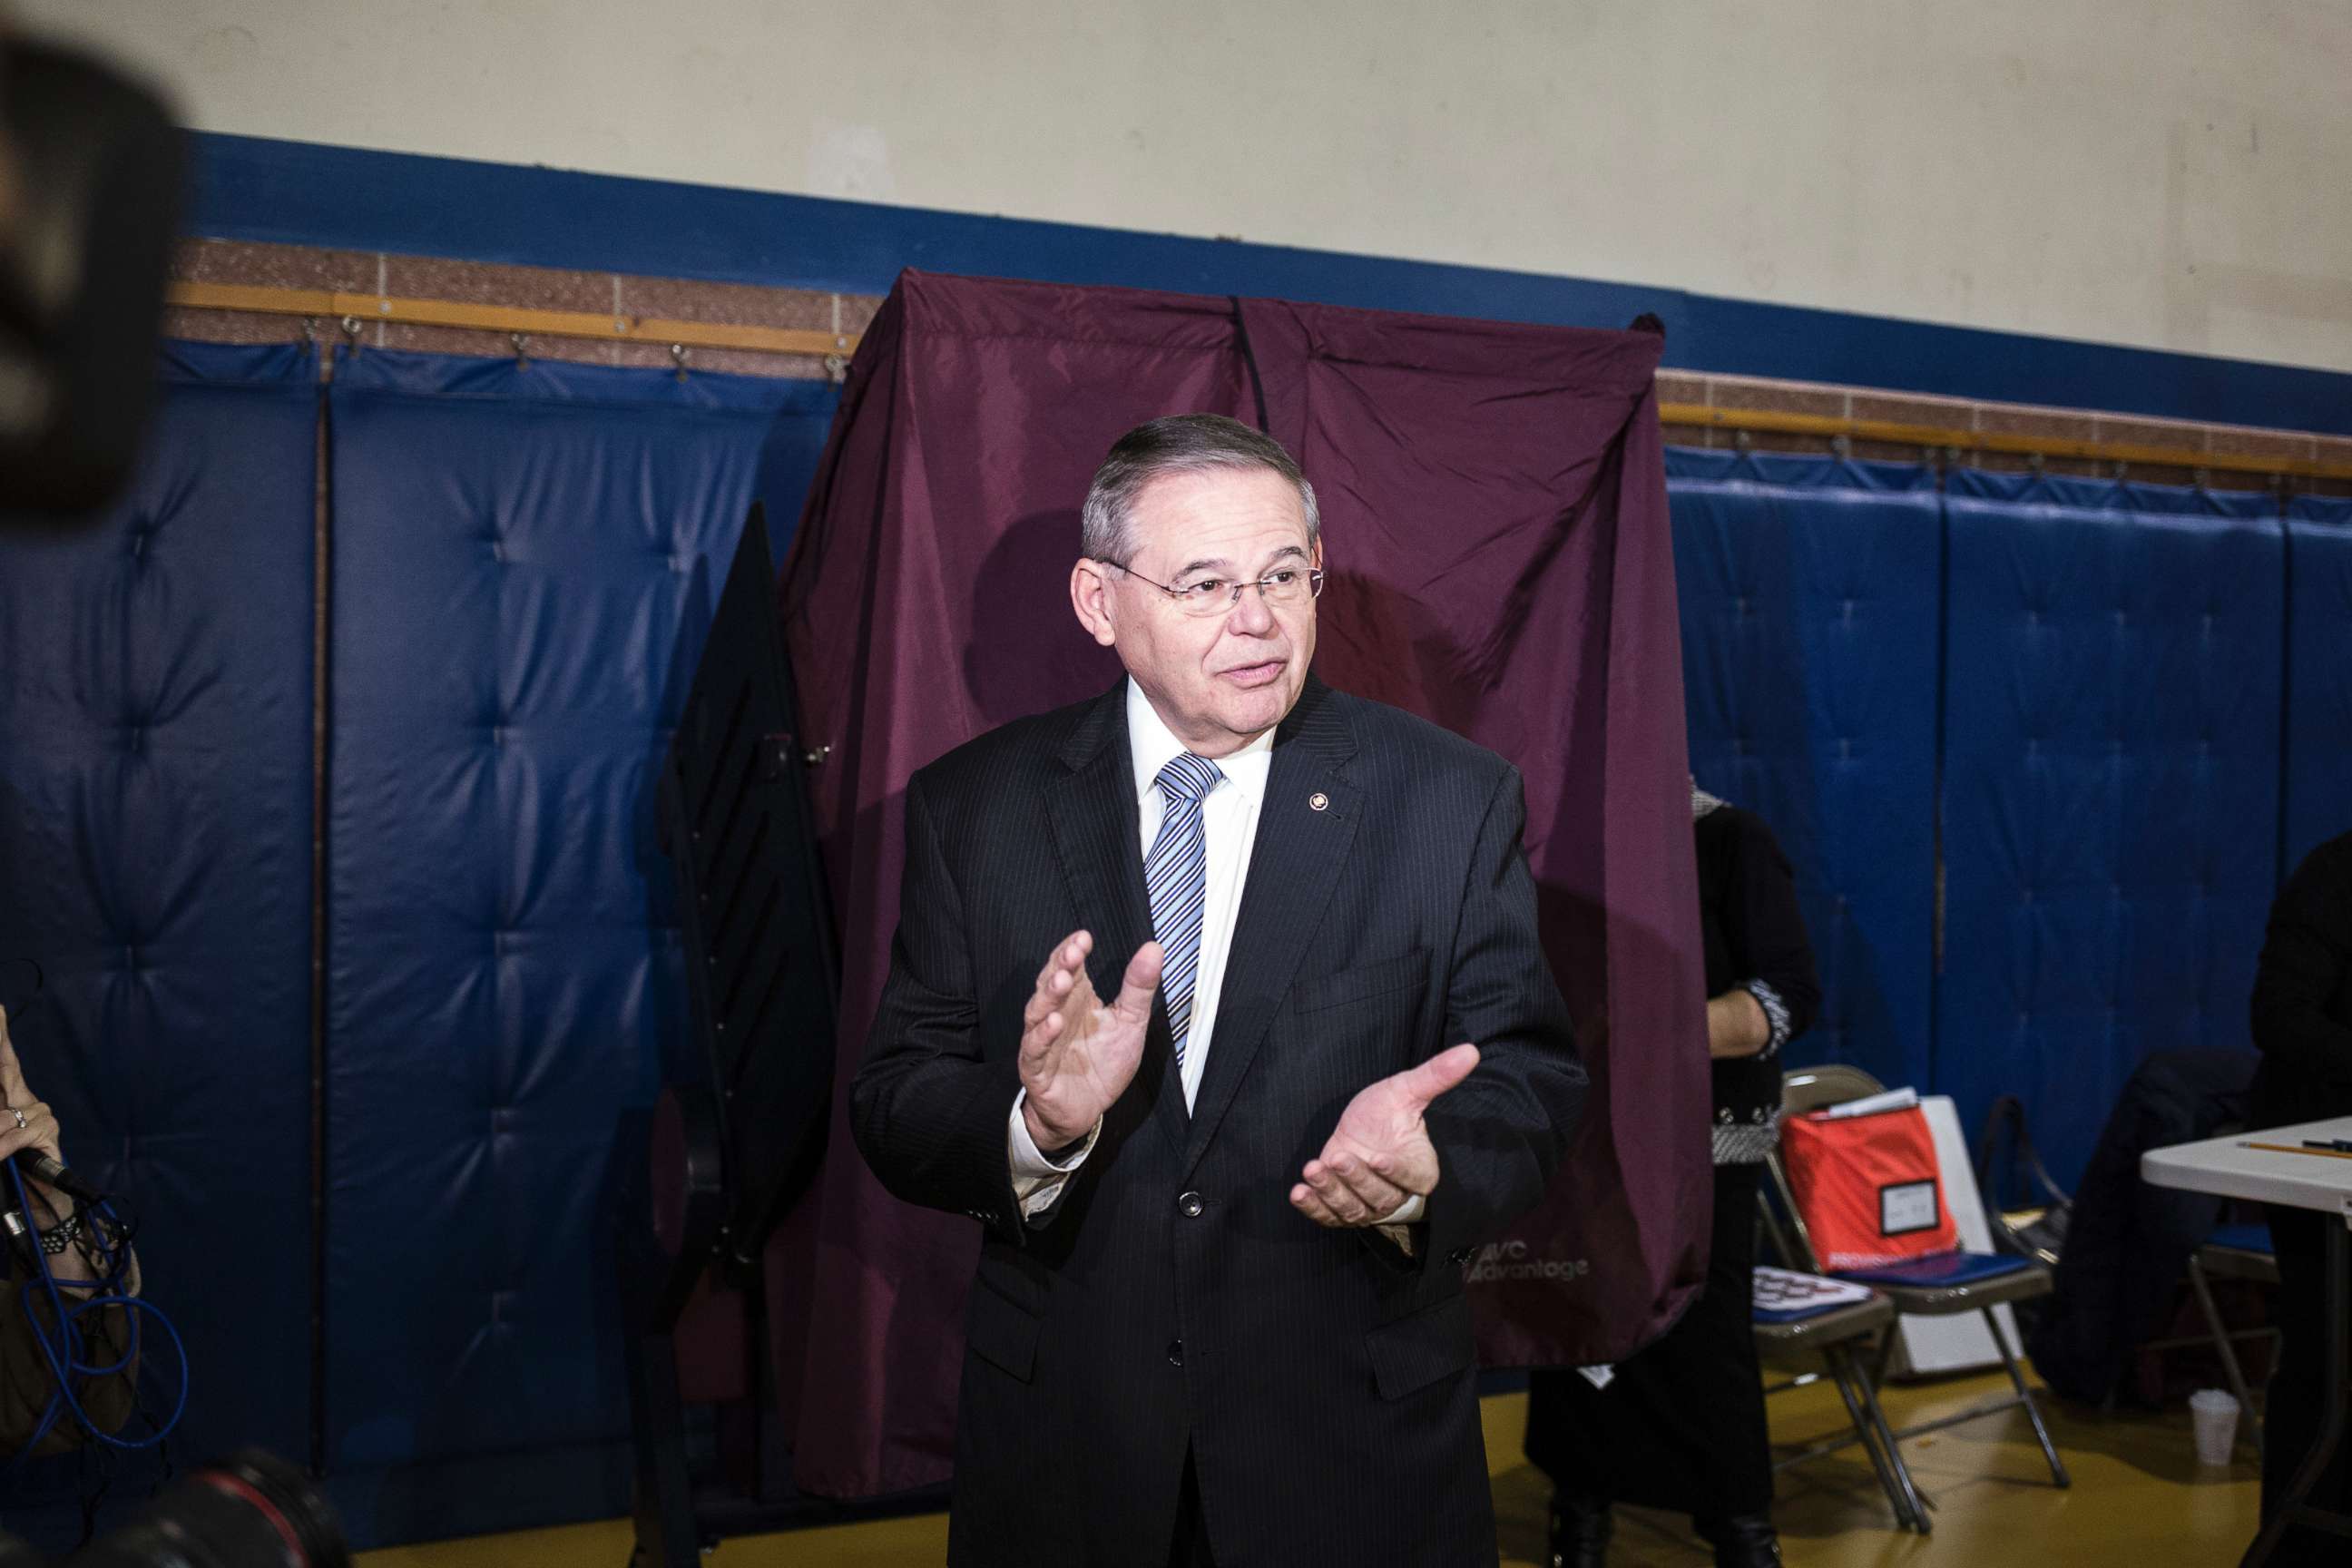 PHOTO: Sen. Robert Menendez walks from a poll after casting a ballot on Election Day morning at the community center in Harrison, N.J., Nov. 6, 2018.